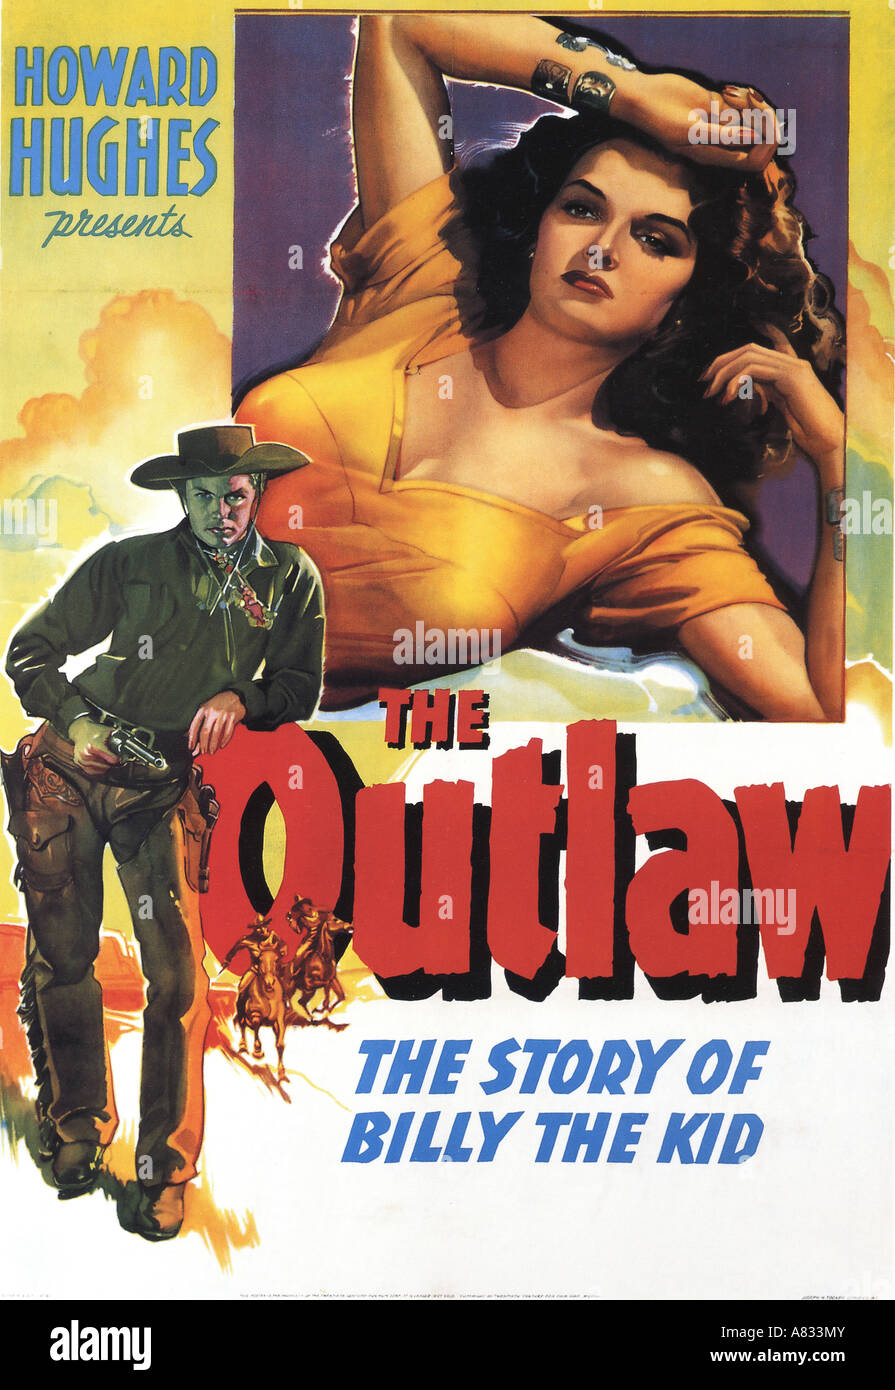 THE OUTLAW - poster for 1943 Howard Hughes film with Jane Russell Stock Photo